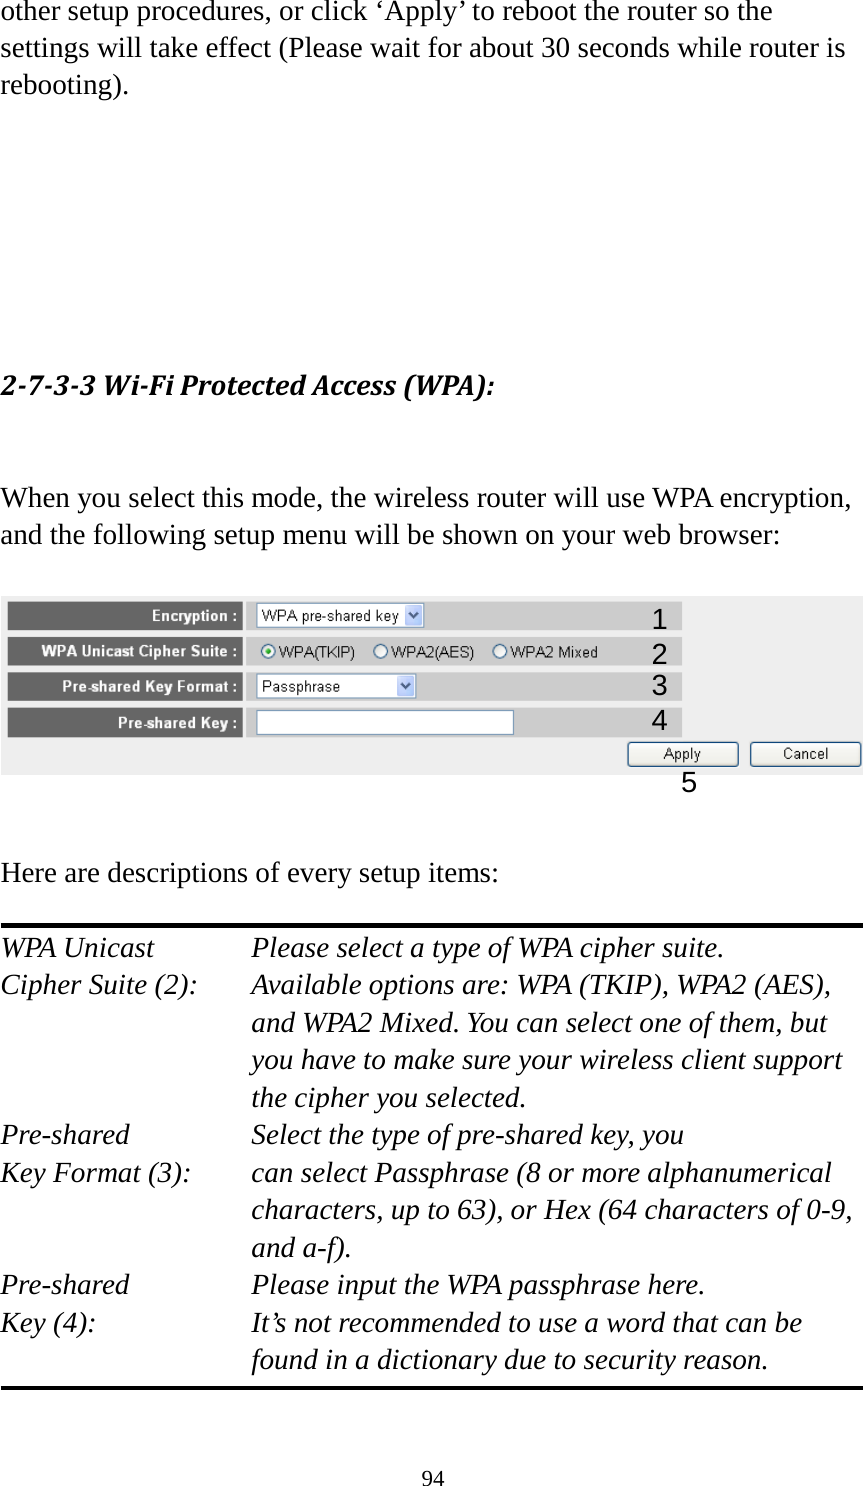 94 other setup procedures, or click ‘Apply’ to reboot the router so the settings will take effect (Please wait for about 30 seconds while router is rebooting).       2-7-3-3 Wi-Fi Protected Access (WPA):  When you select this mode, the wireless router will use WPA encryption, and the following setup menu will be shown on your web browser:     Here are descriptions of every setup items:  WPA Unicast      Please select a type of WPA cipher suite. Cipher Suite (2): Available options are: WPA (TKIP), WPA2 (AES), and WPA2 Mixed. You can select one of them, but you have to make sure your wireless client support the cipher you selected. Pre-shared       Select the type of pre-shared key, you Key Format (3):   can select Passphrase (8 or more alphanumerical characters, up to 63), or Hex (64 characters of 0-9, and a-f). Pre-shared       Please input the WPA passphrase here. Key (4):    It’s not recommended to use a word that can be found in a dictionary due to security reason.  1 2 3 5 4 